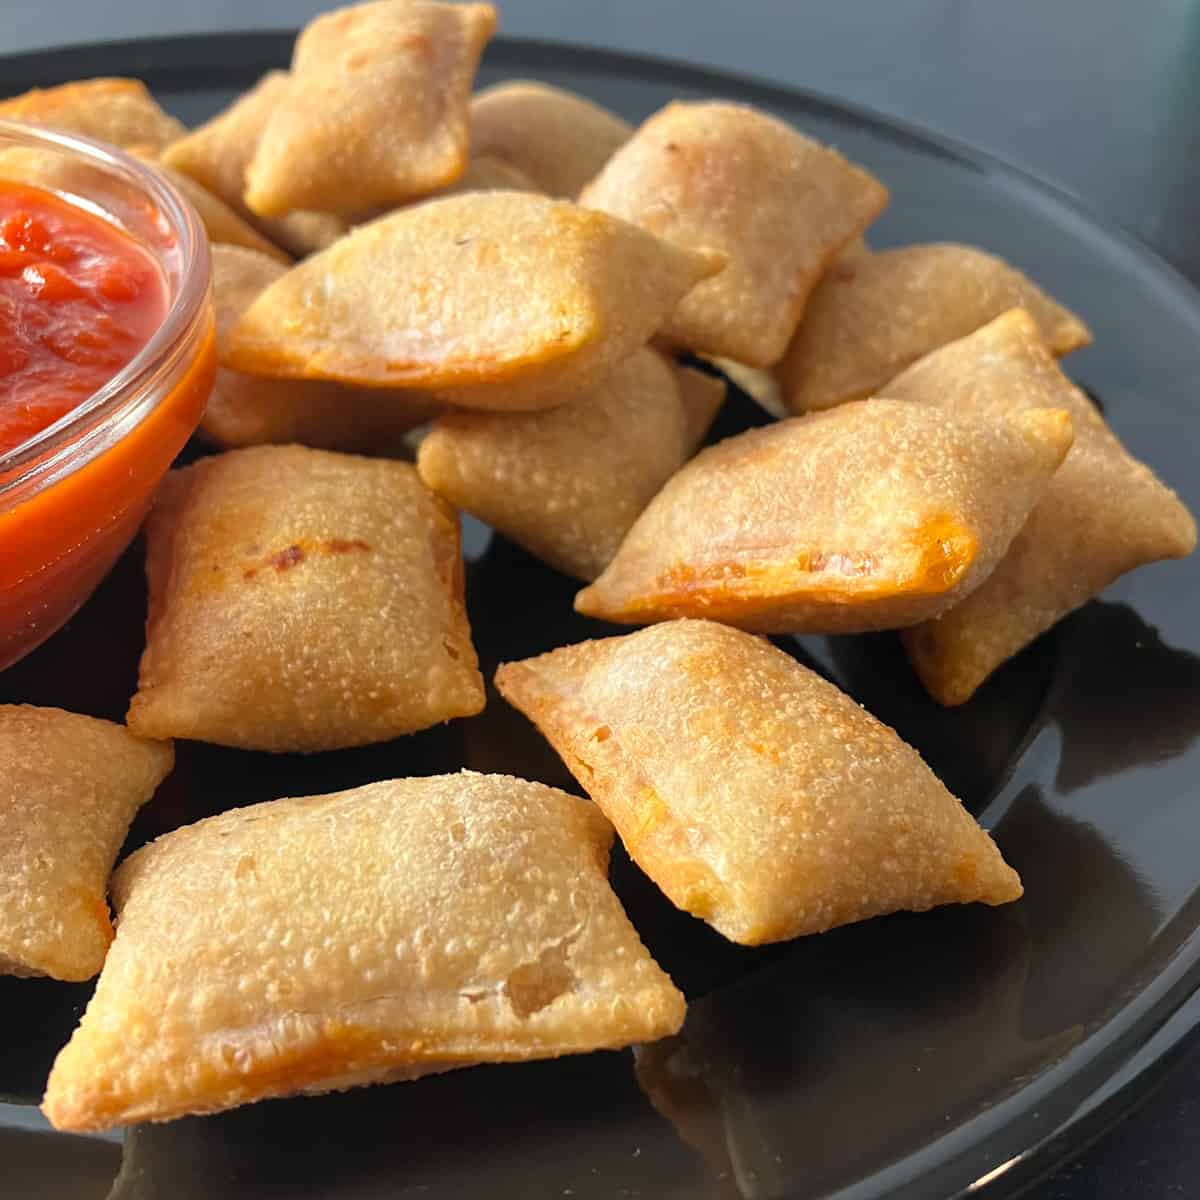 Totino's Pizza Rolls Air Fryer (Air Fry Totinos Pizza Rolls)